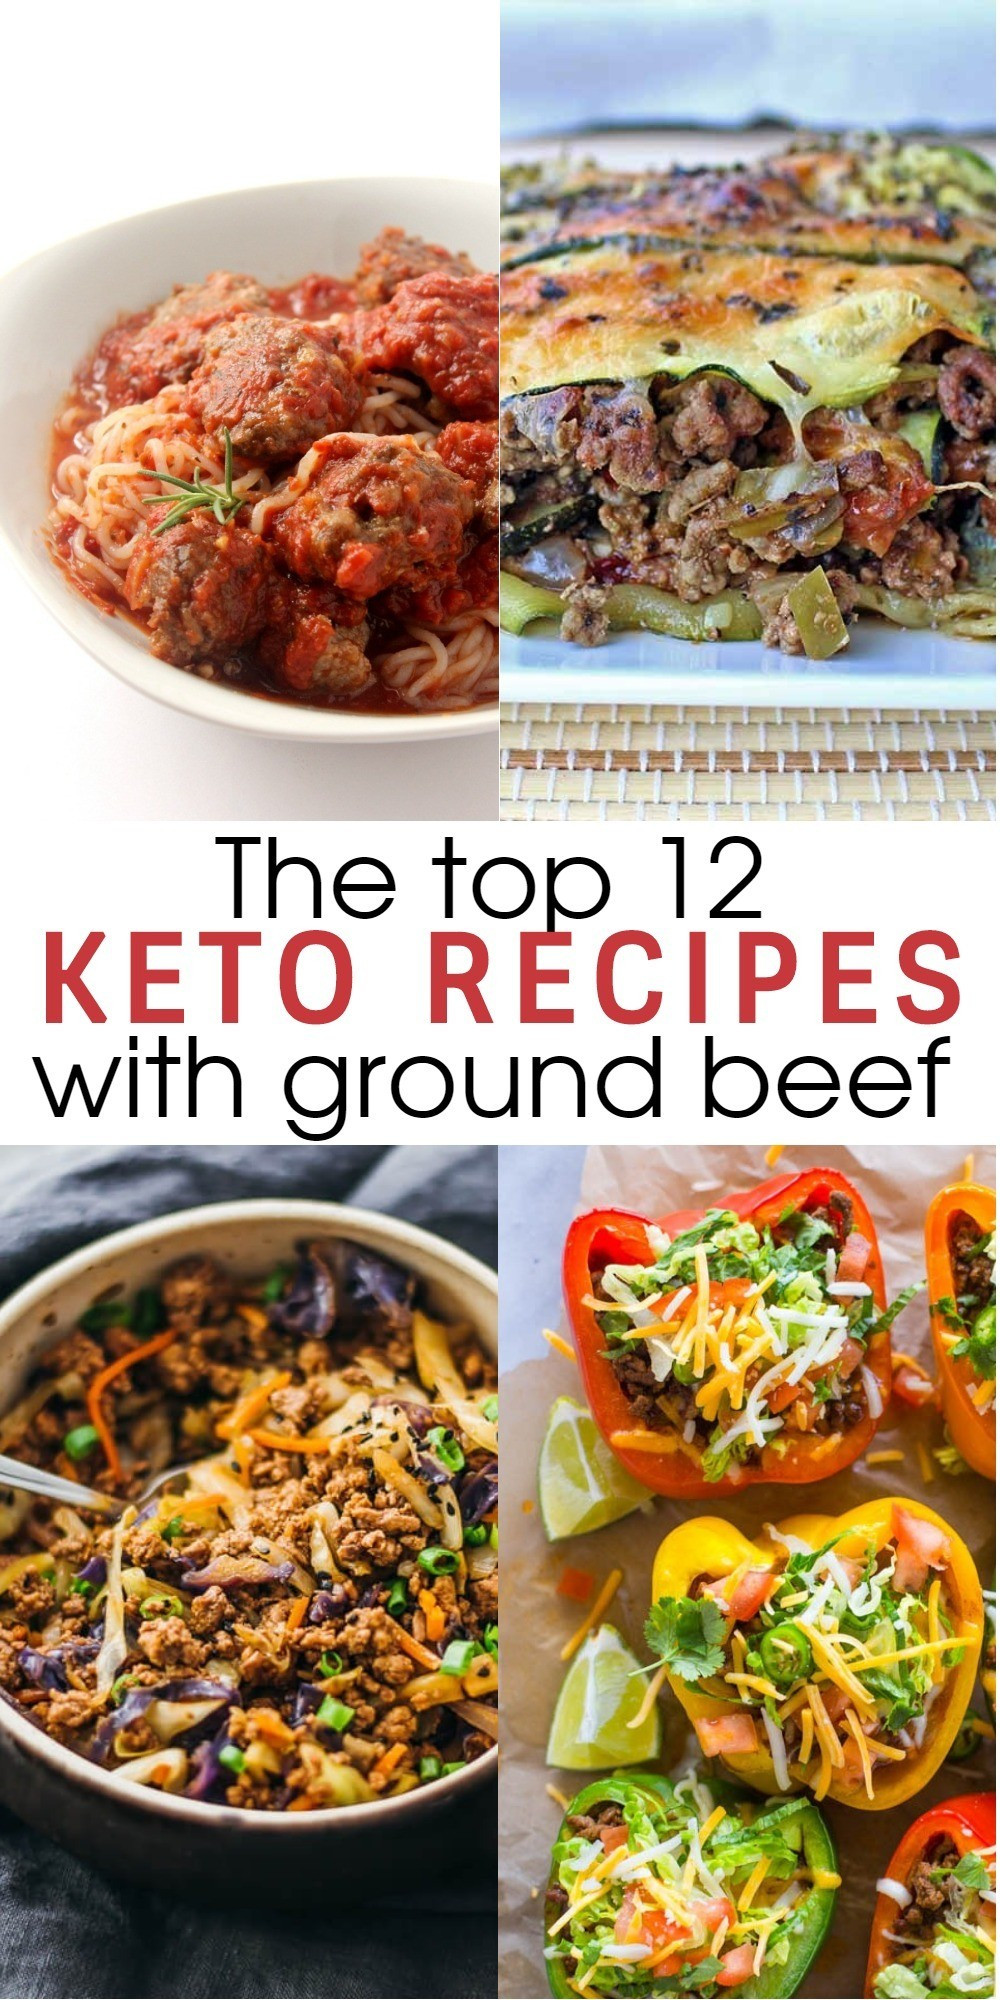 Hamburger Meat Recipes Healthy Keto
 12 Flavorful and Easy Keto Recipes With Ground Beef To Try